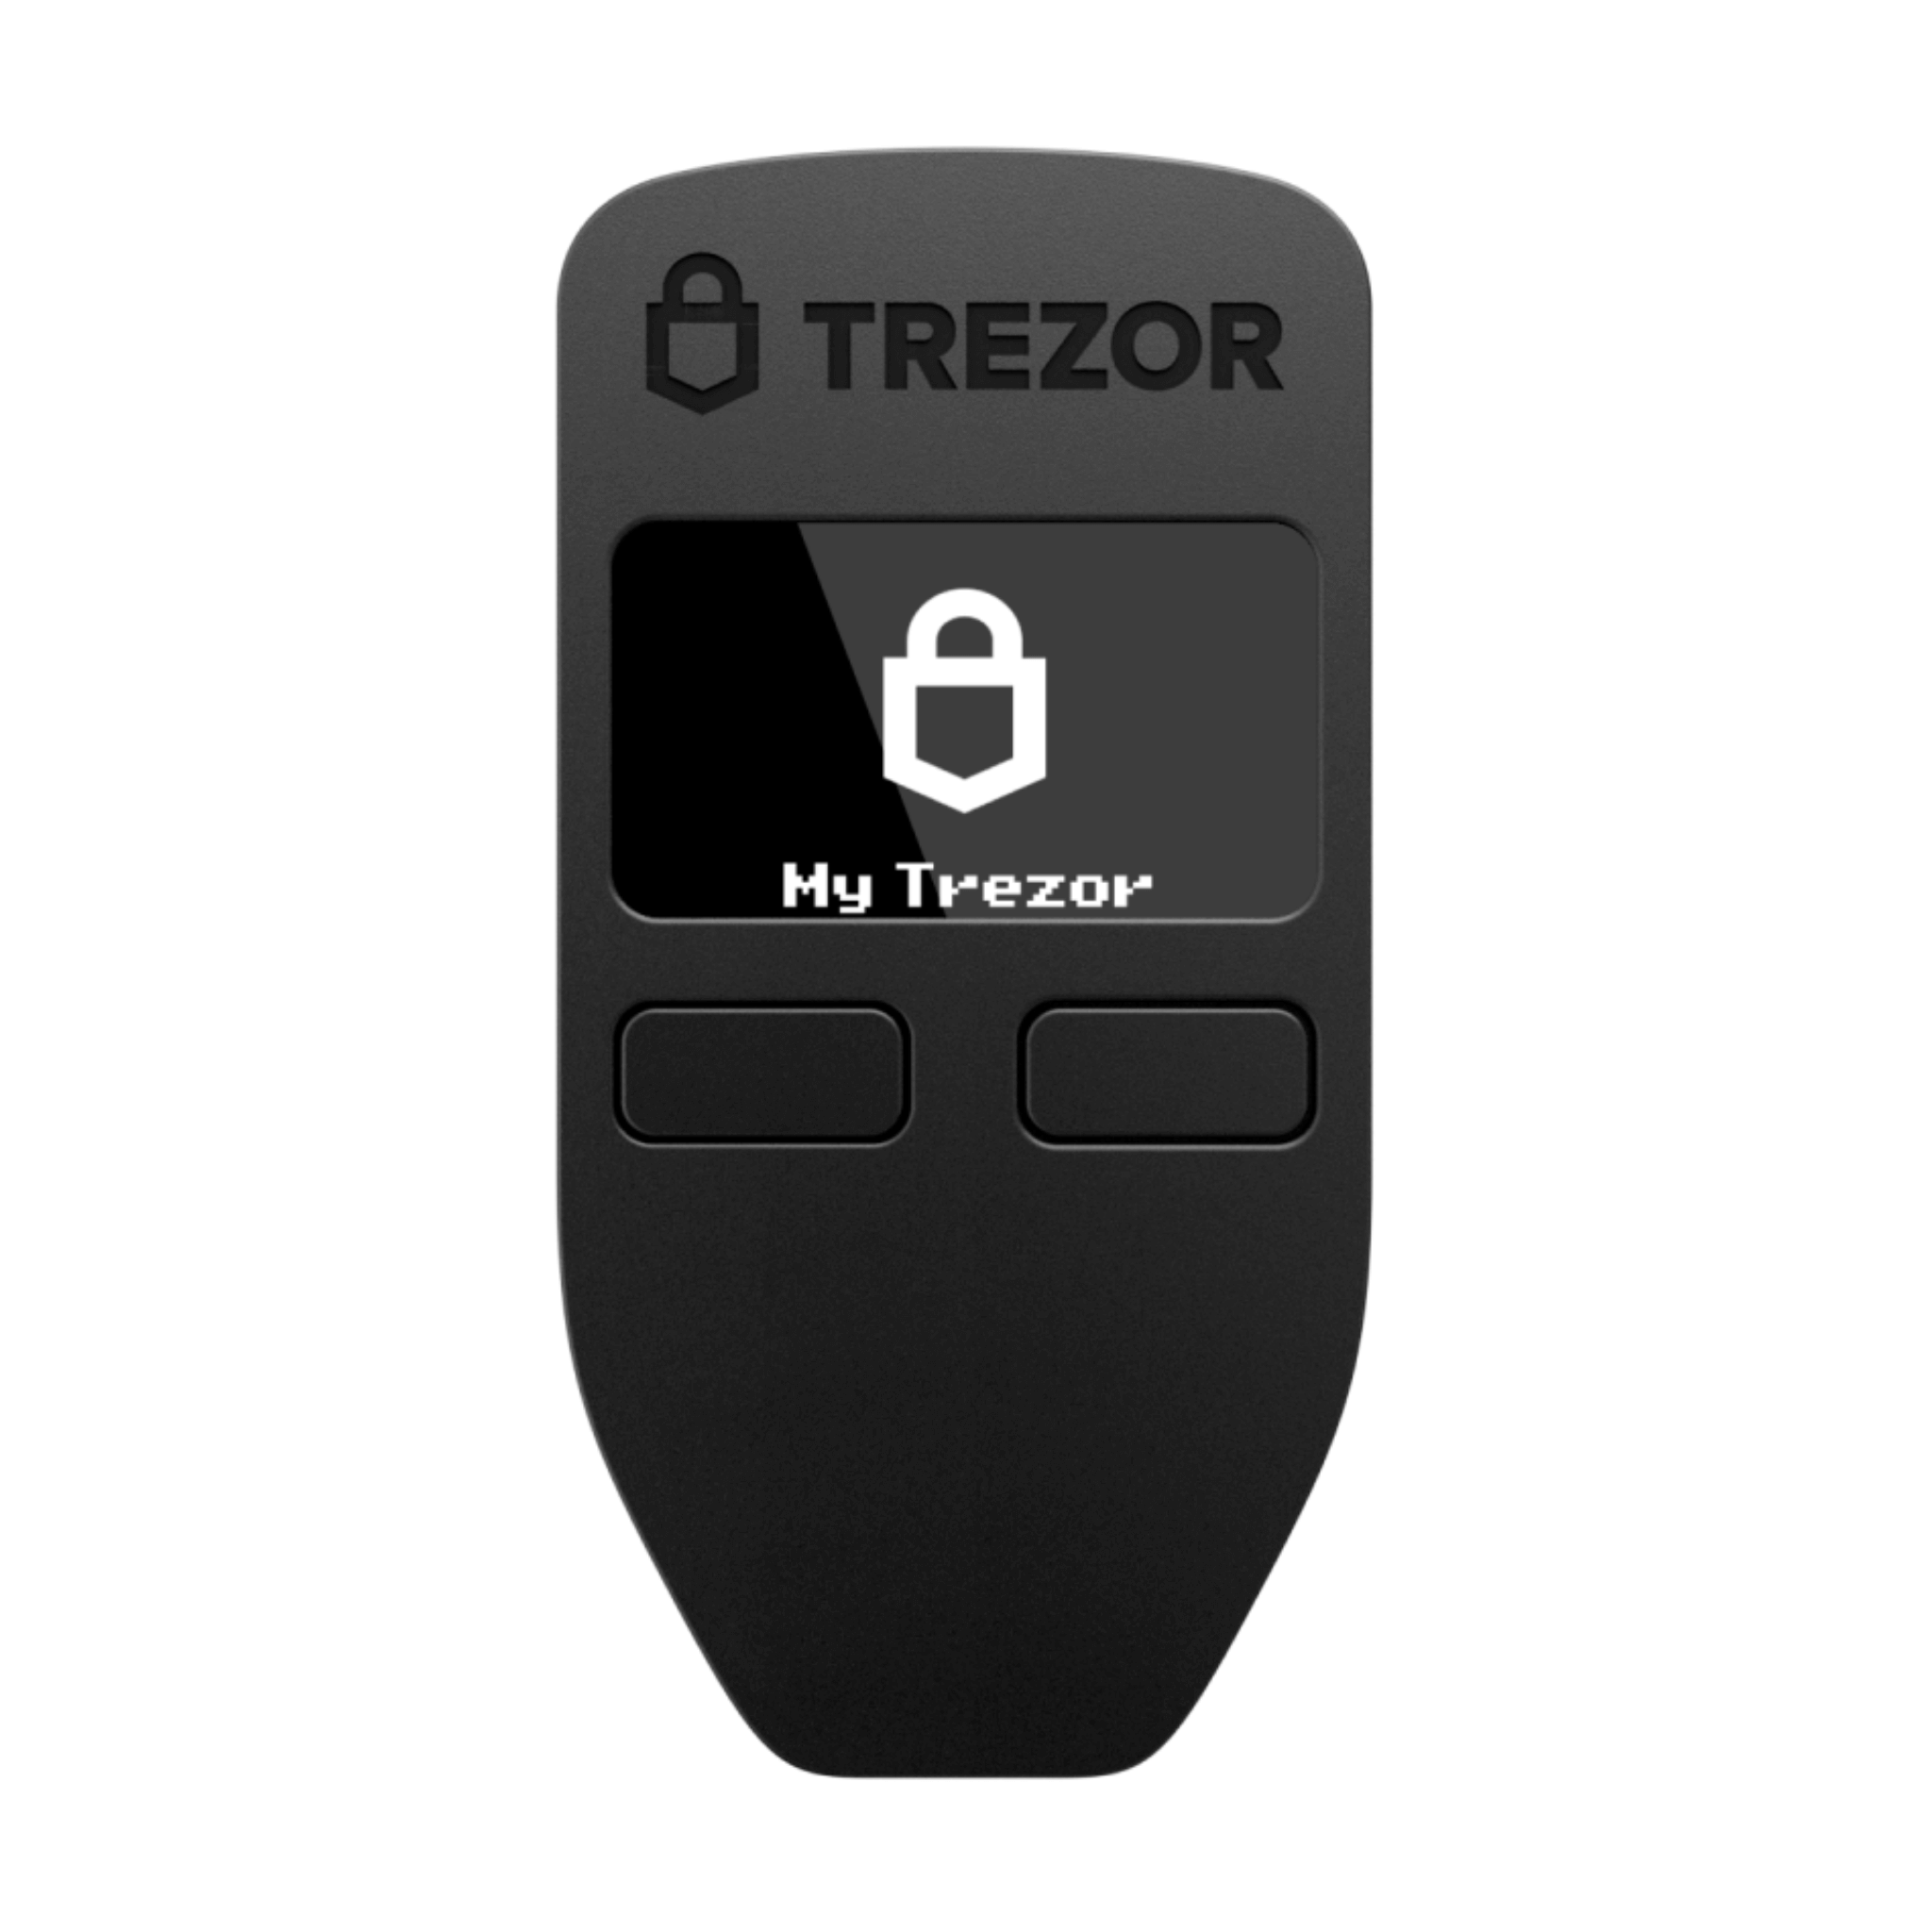 Trezor Model One Cryptocurrency Hardware Wallet